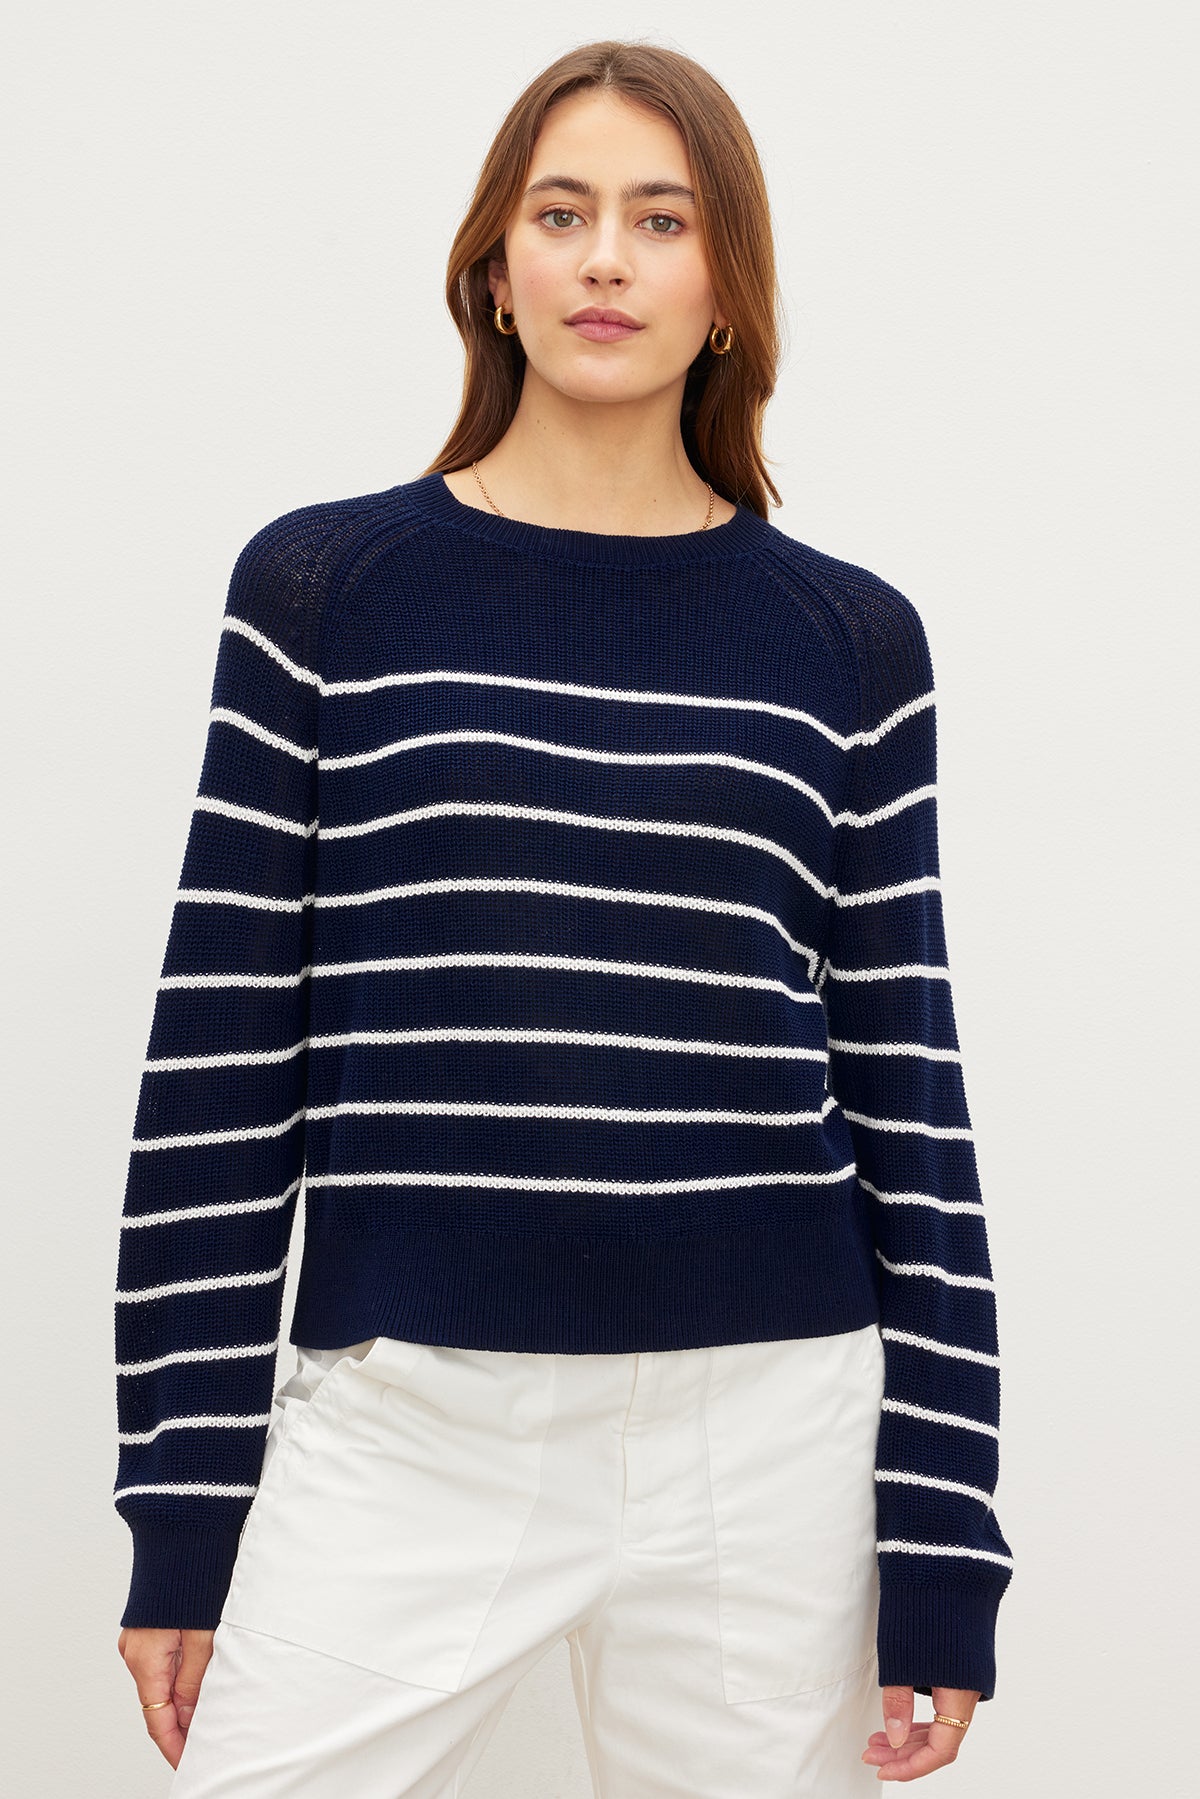 A woman wearing a Velvet by Graham & Spencer CHAYSE STRIPED CREW NECK SWEATER, a relaxed silhouette, navy and white striped sweater made of textured cotton.-35955537215681